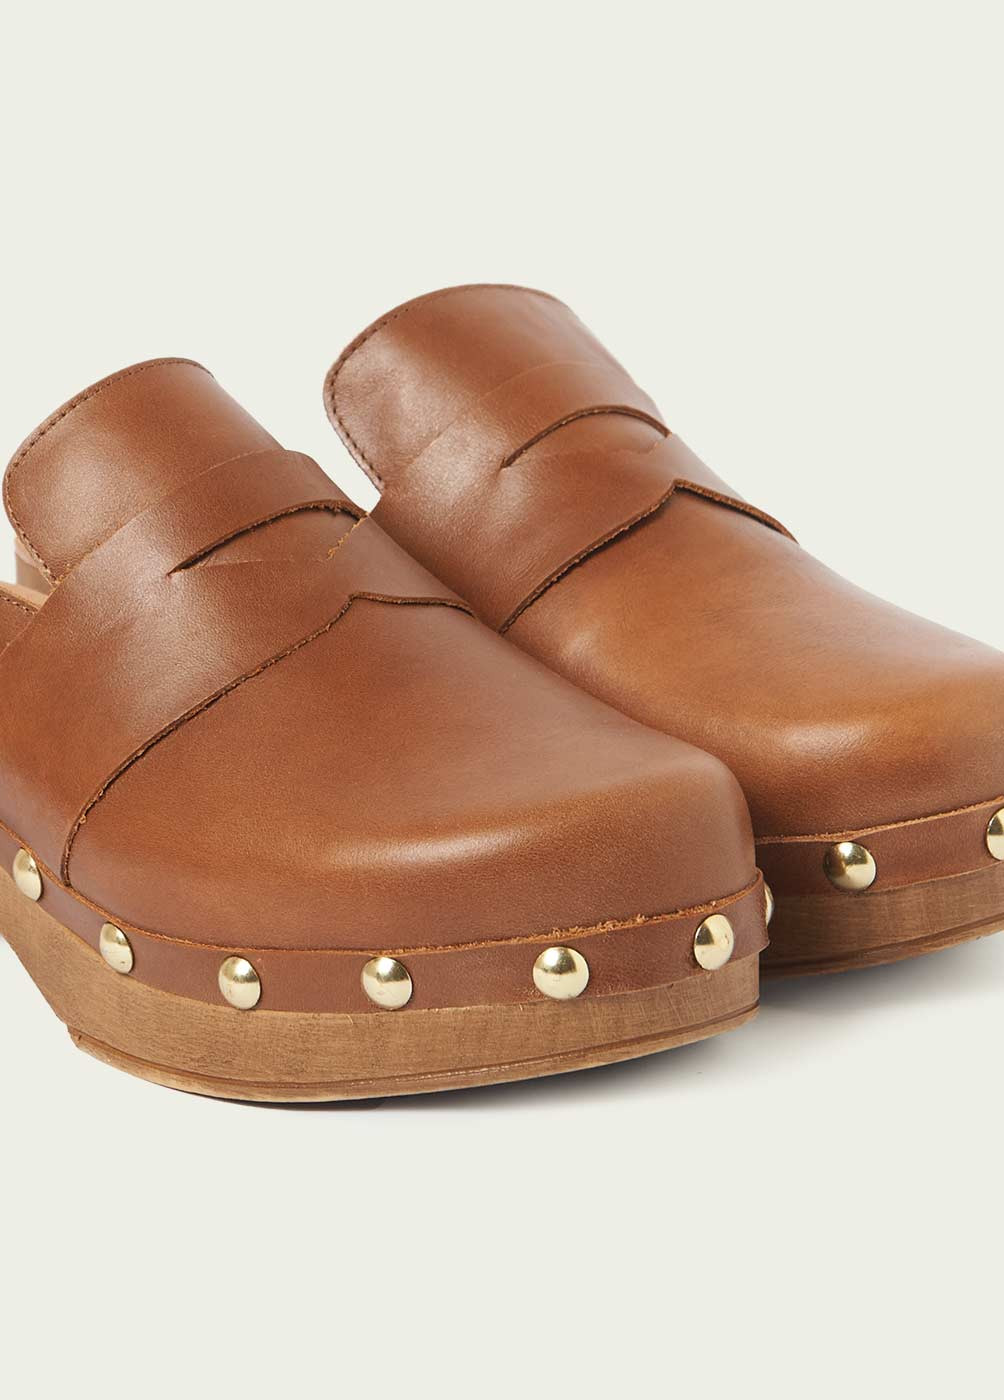 LEATHER CLOGS W/ PENNY LOAFER DETAIL